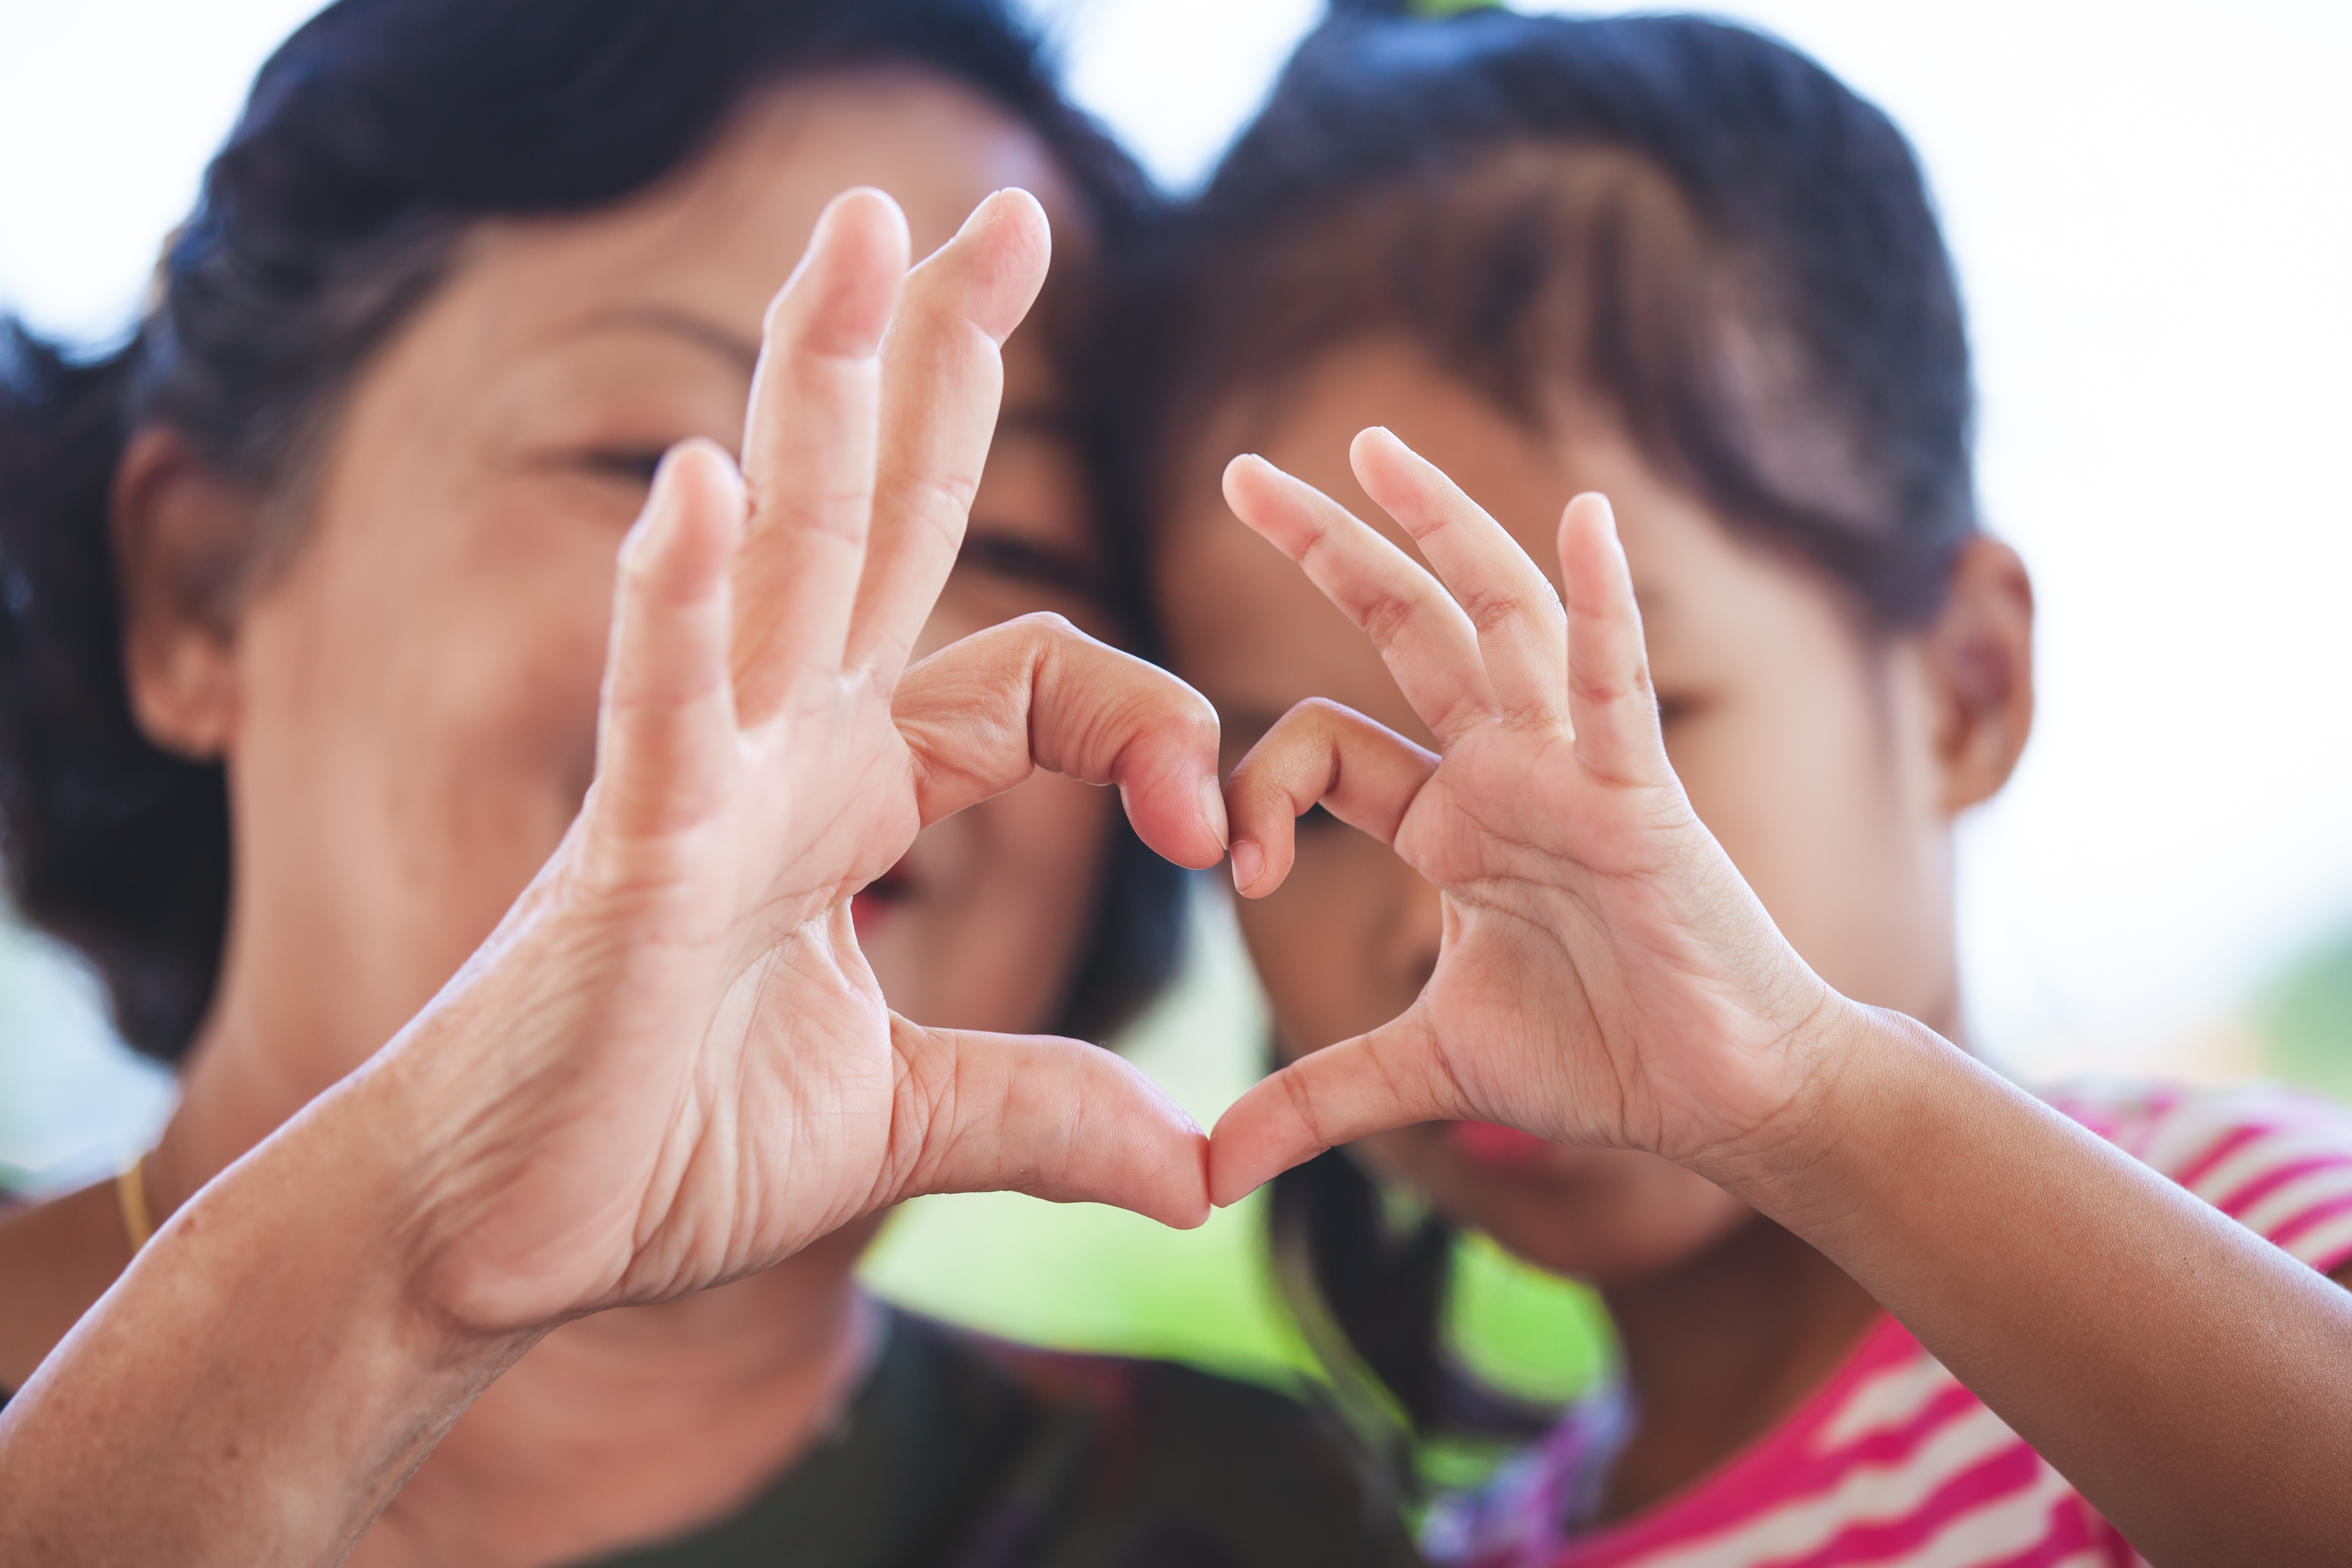 Adult and child making a heart shape with their hands